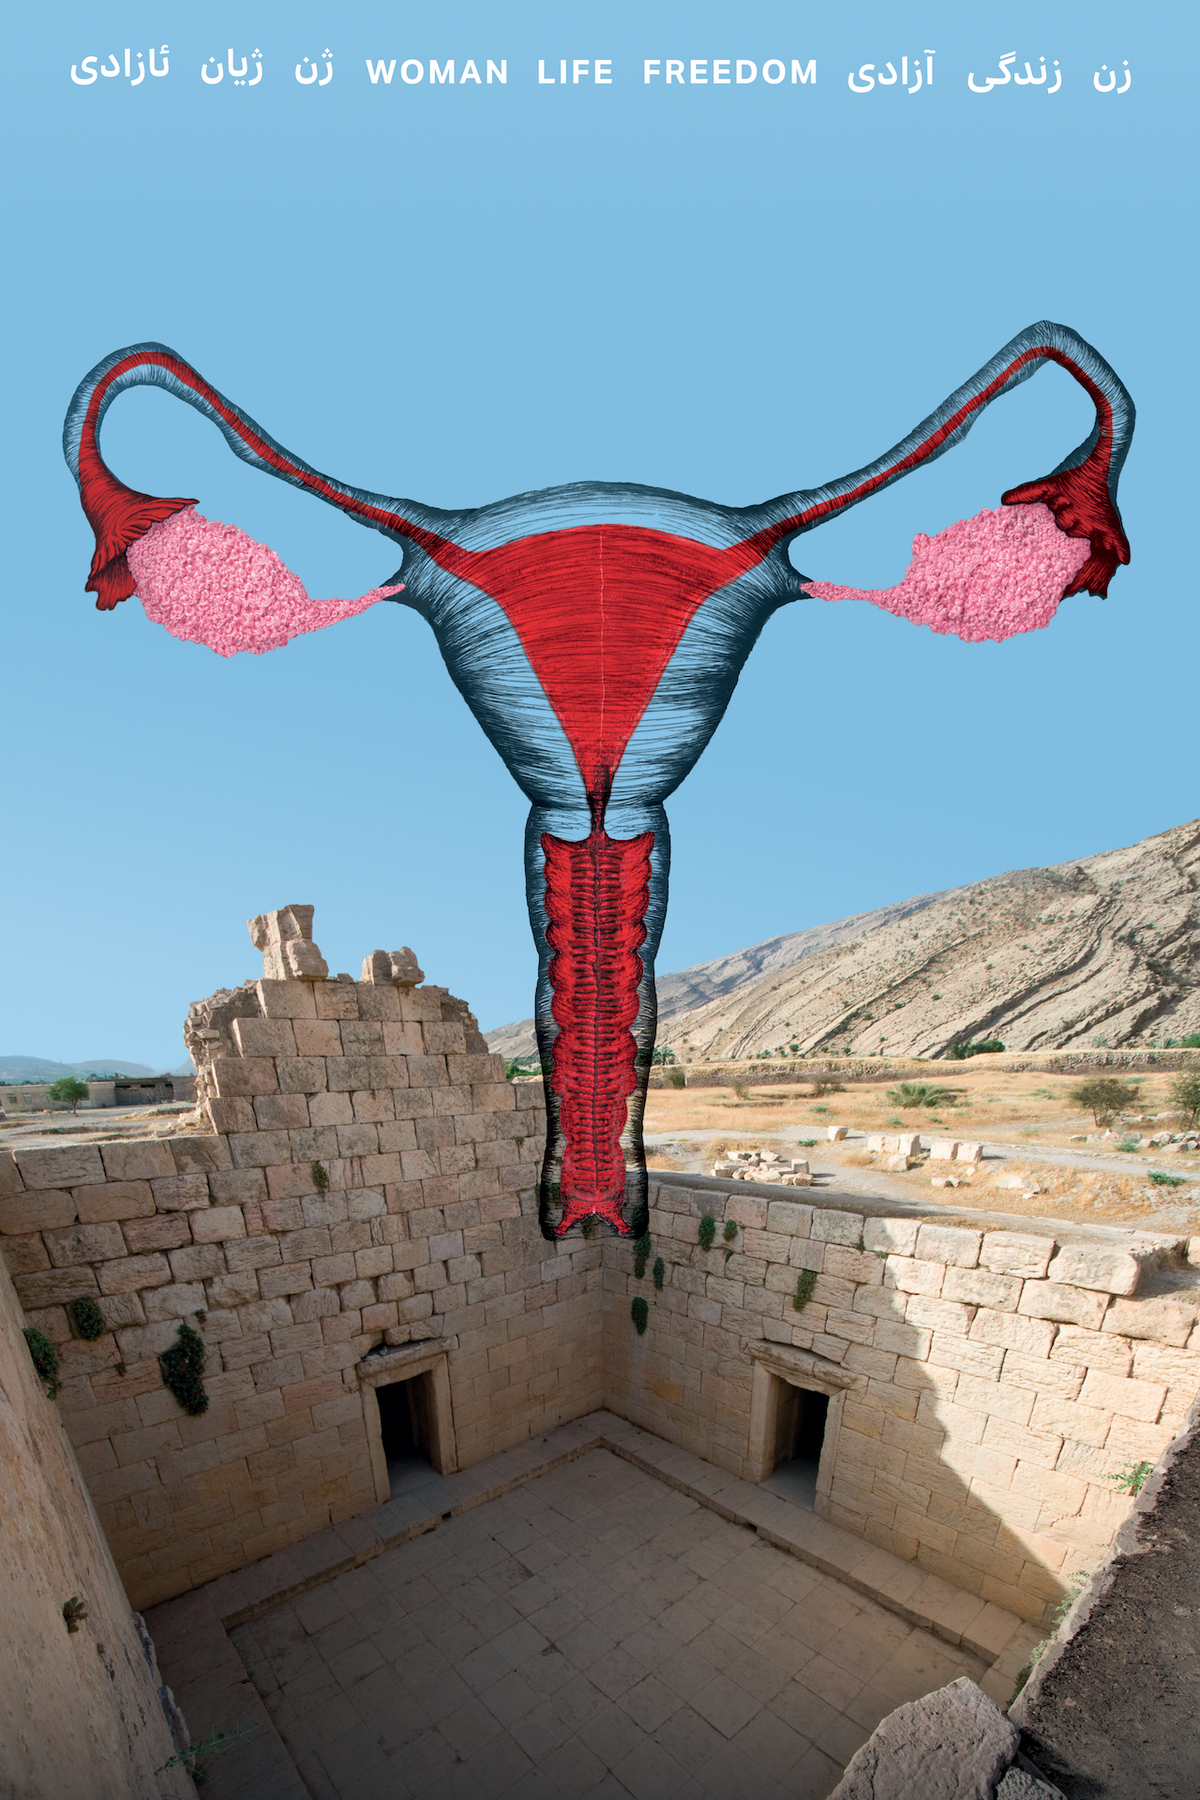 Koushna Navabi's work depicts a uterus superimposed on an Iranian heritage site

Courtesy of the artist